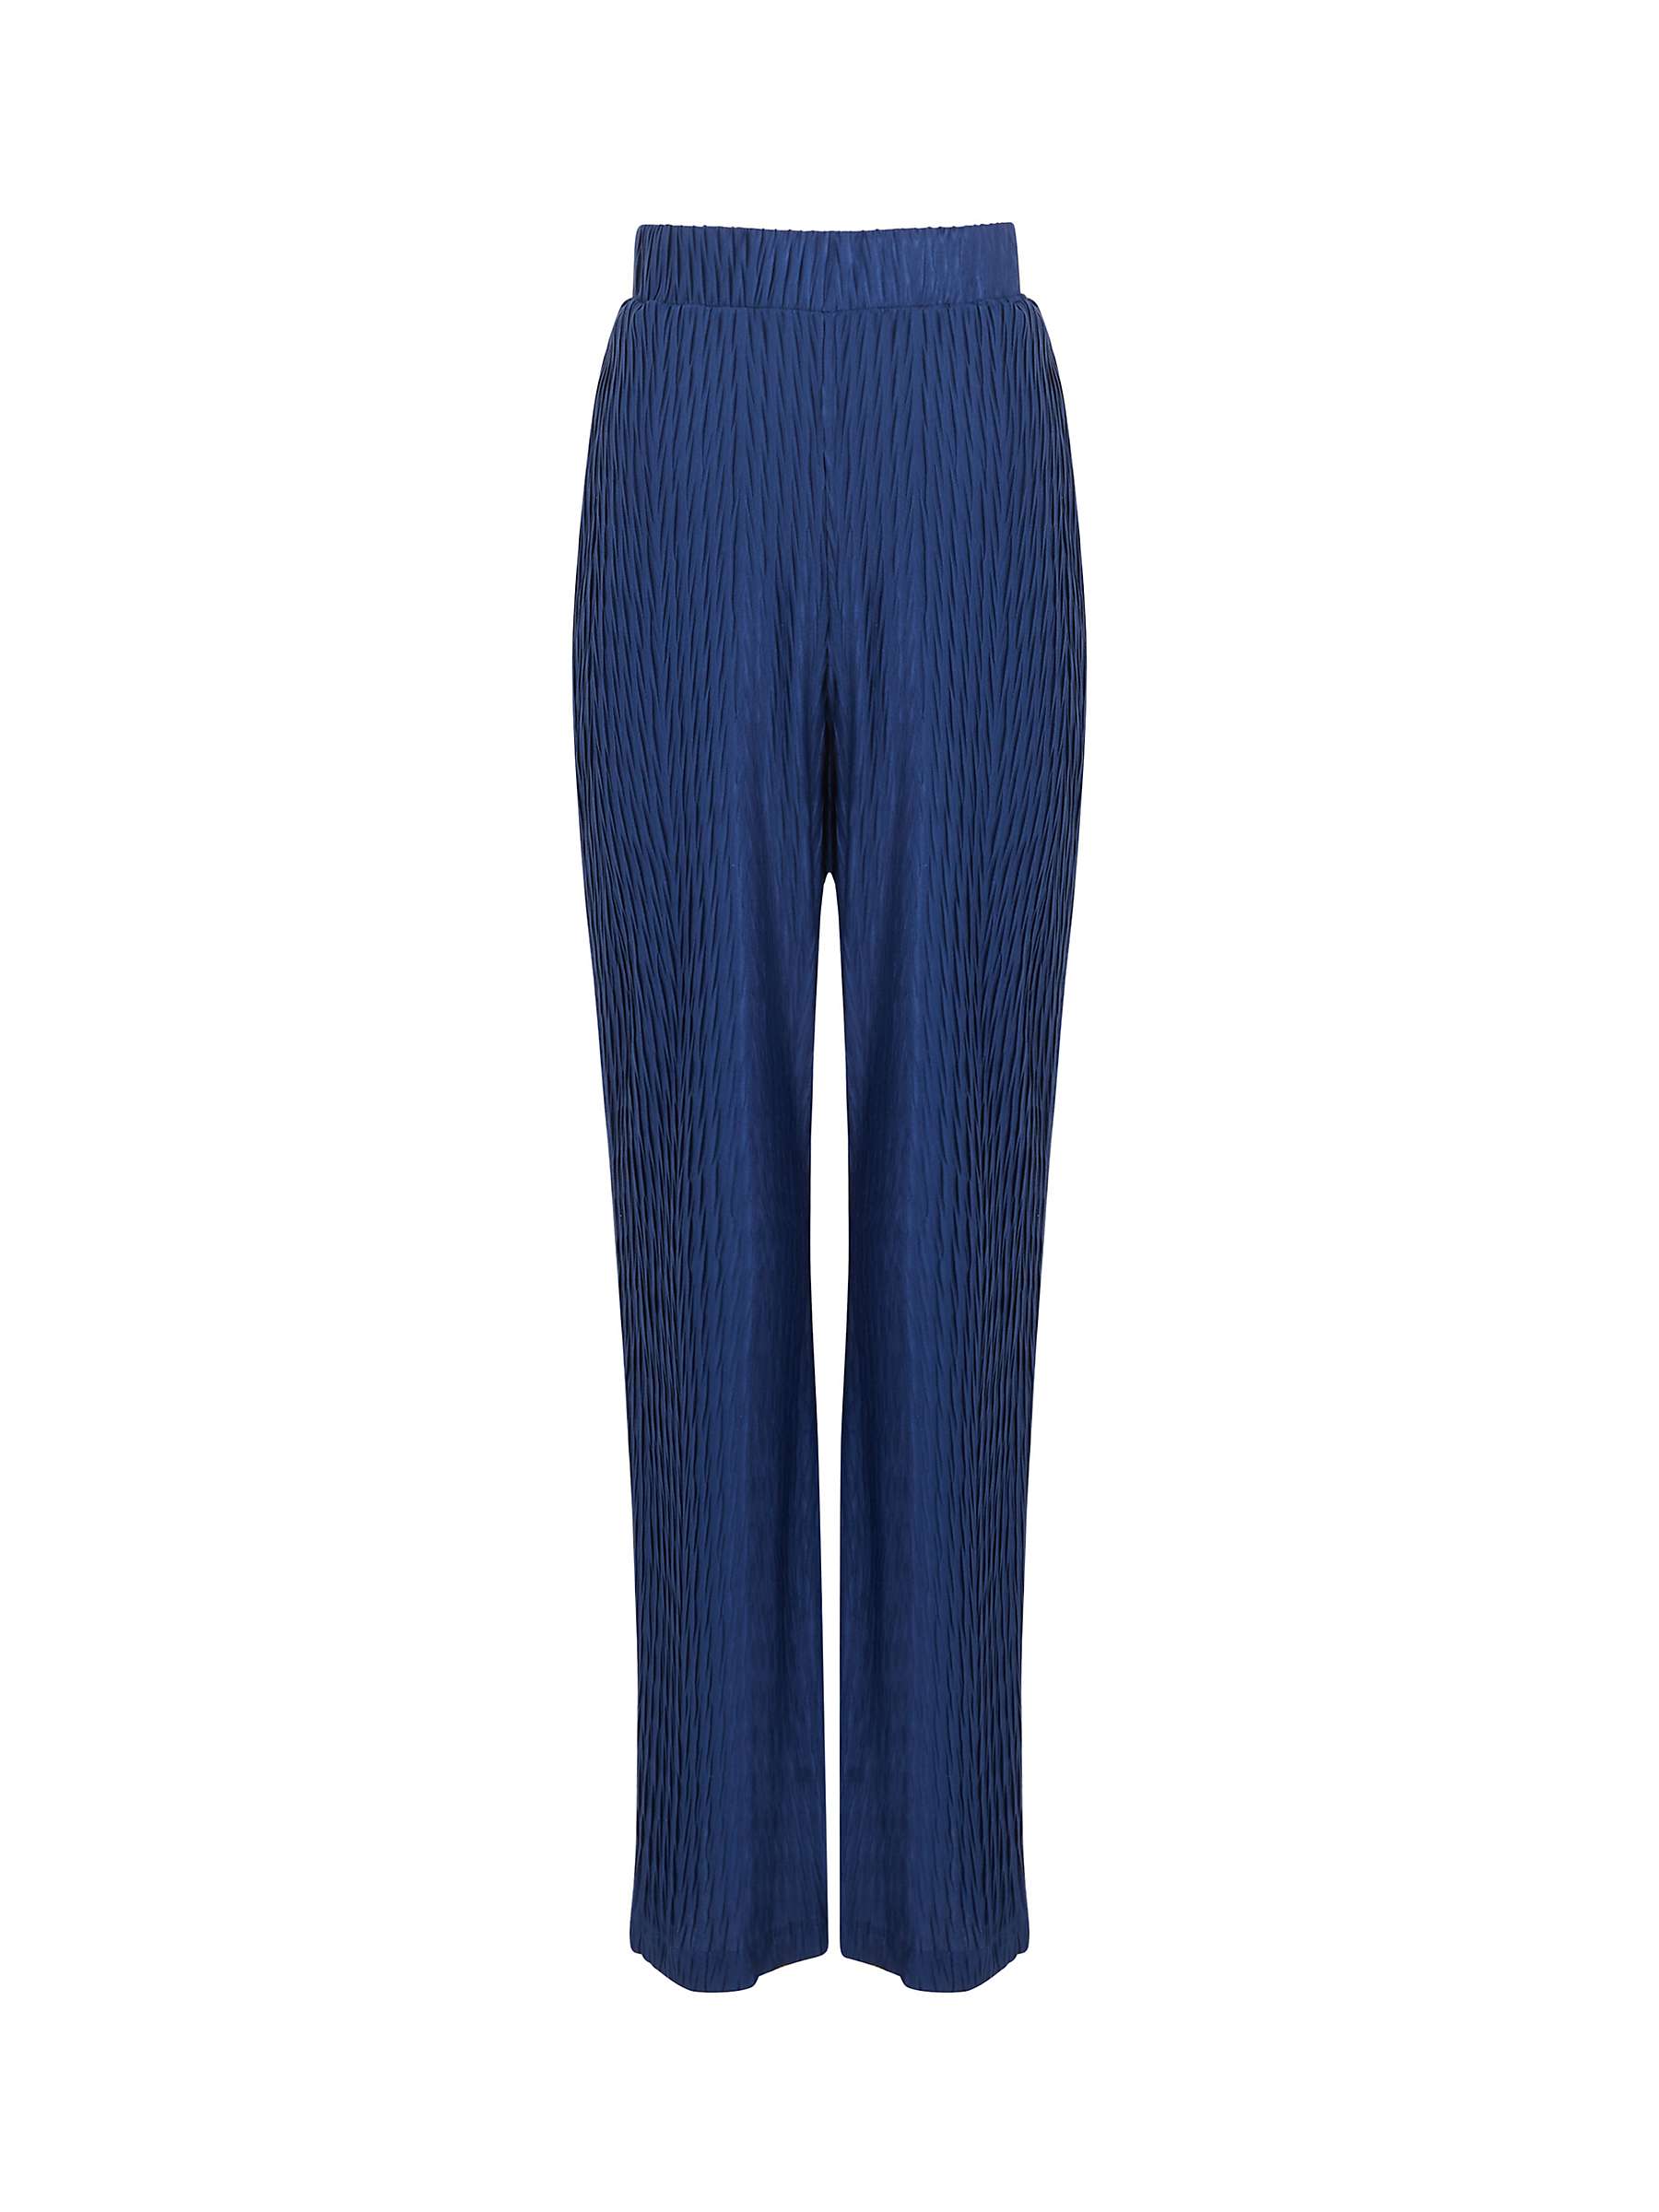 Buy French Connection Scarlette Flared Textured Trousers, Midnight Blue Online at johnlewis.com